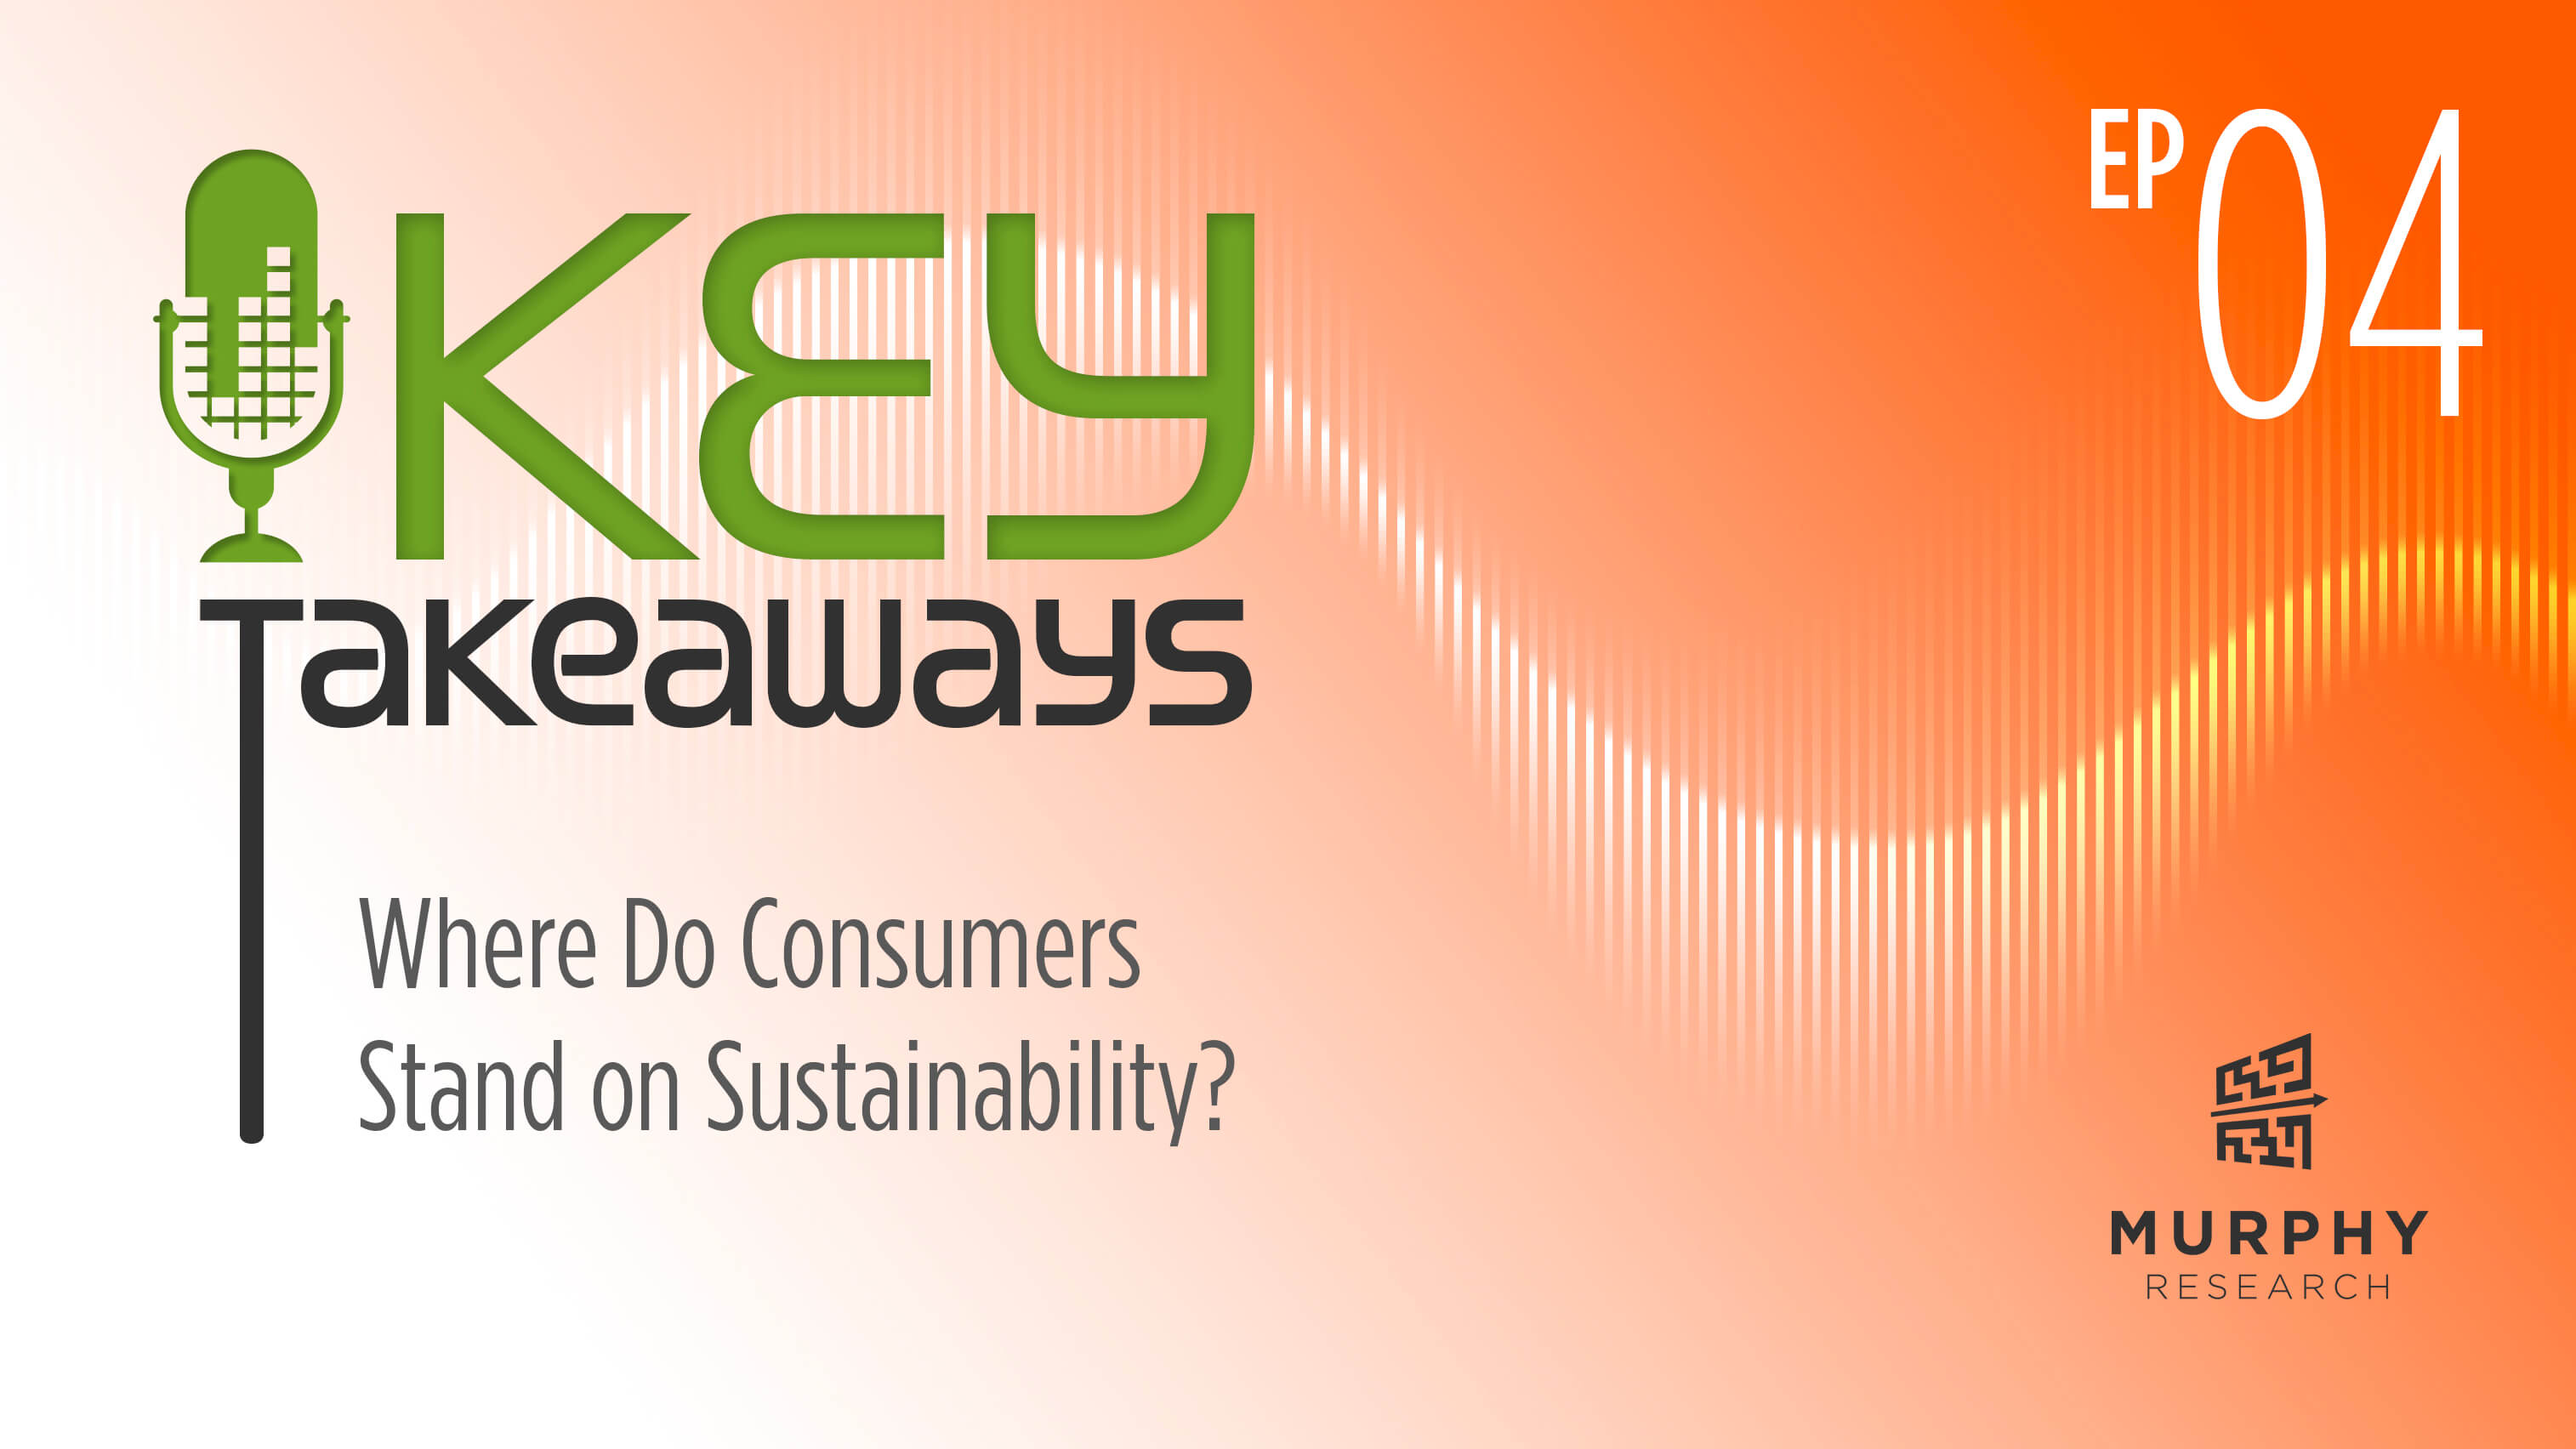 Where Do Consumers Stand On Sustainability?